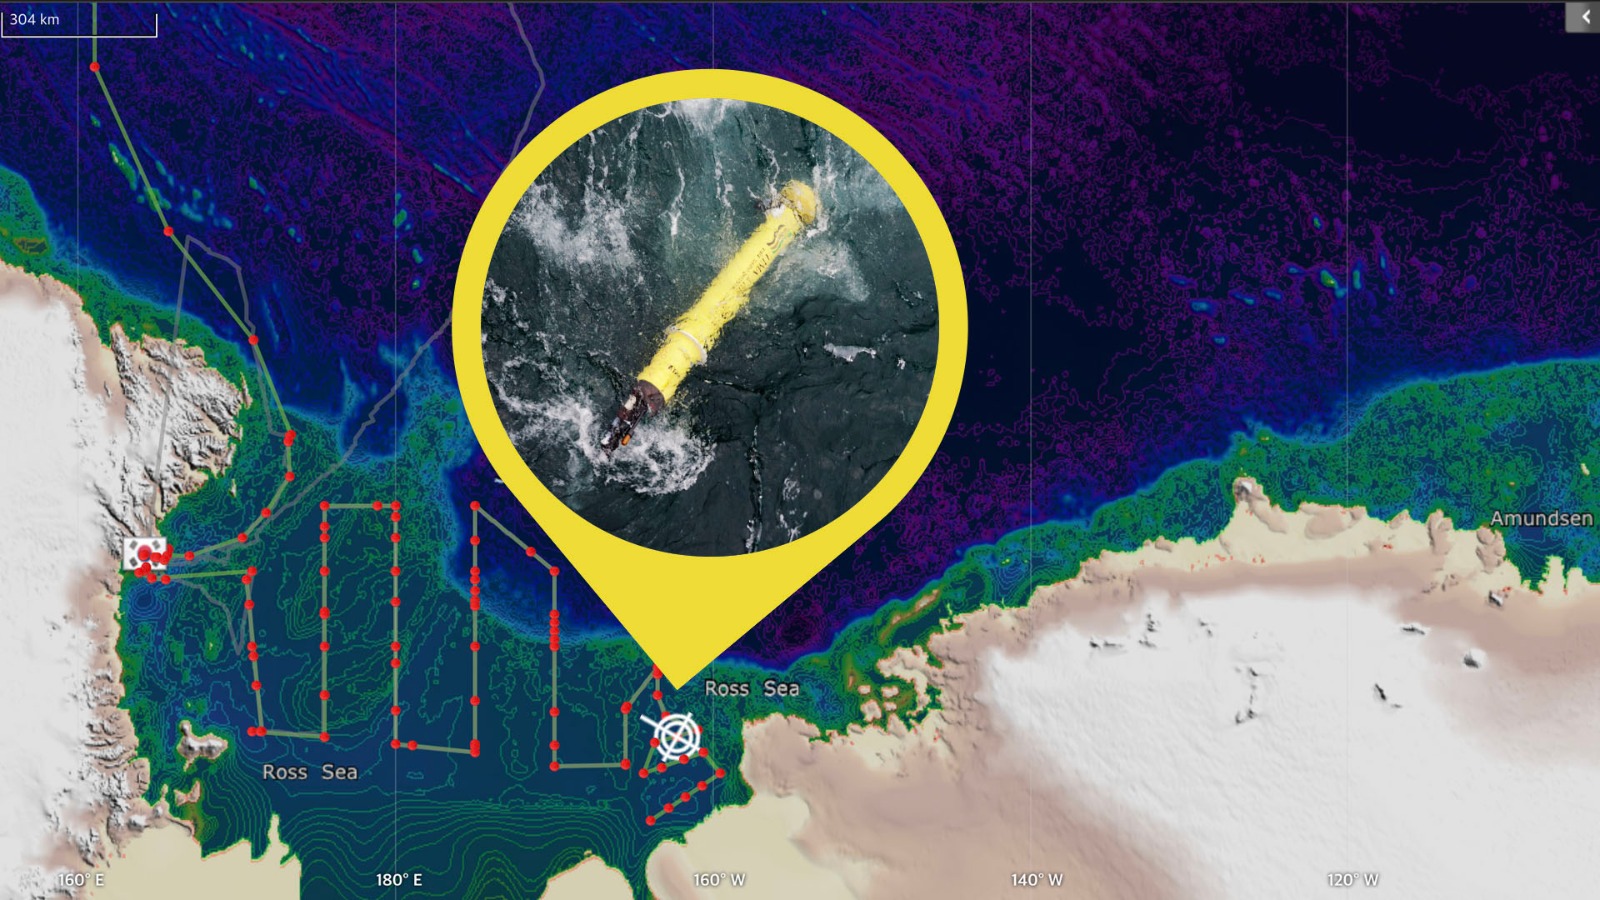 This map shows the location of the float deployment, about 100 km west of the Antarctic continent.